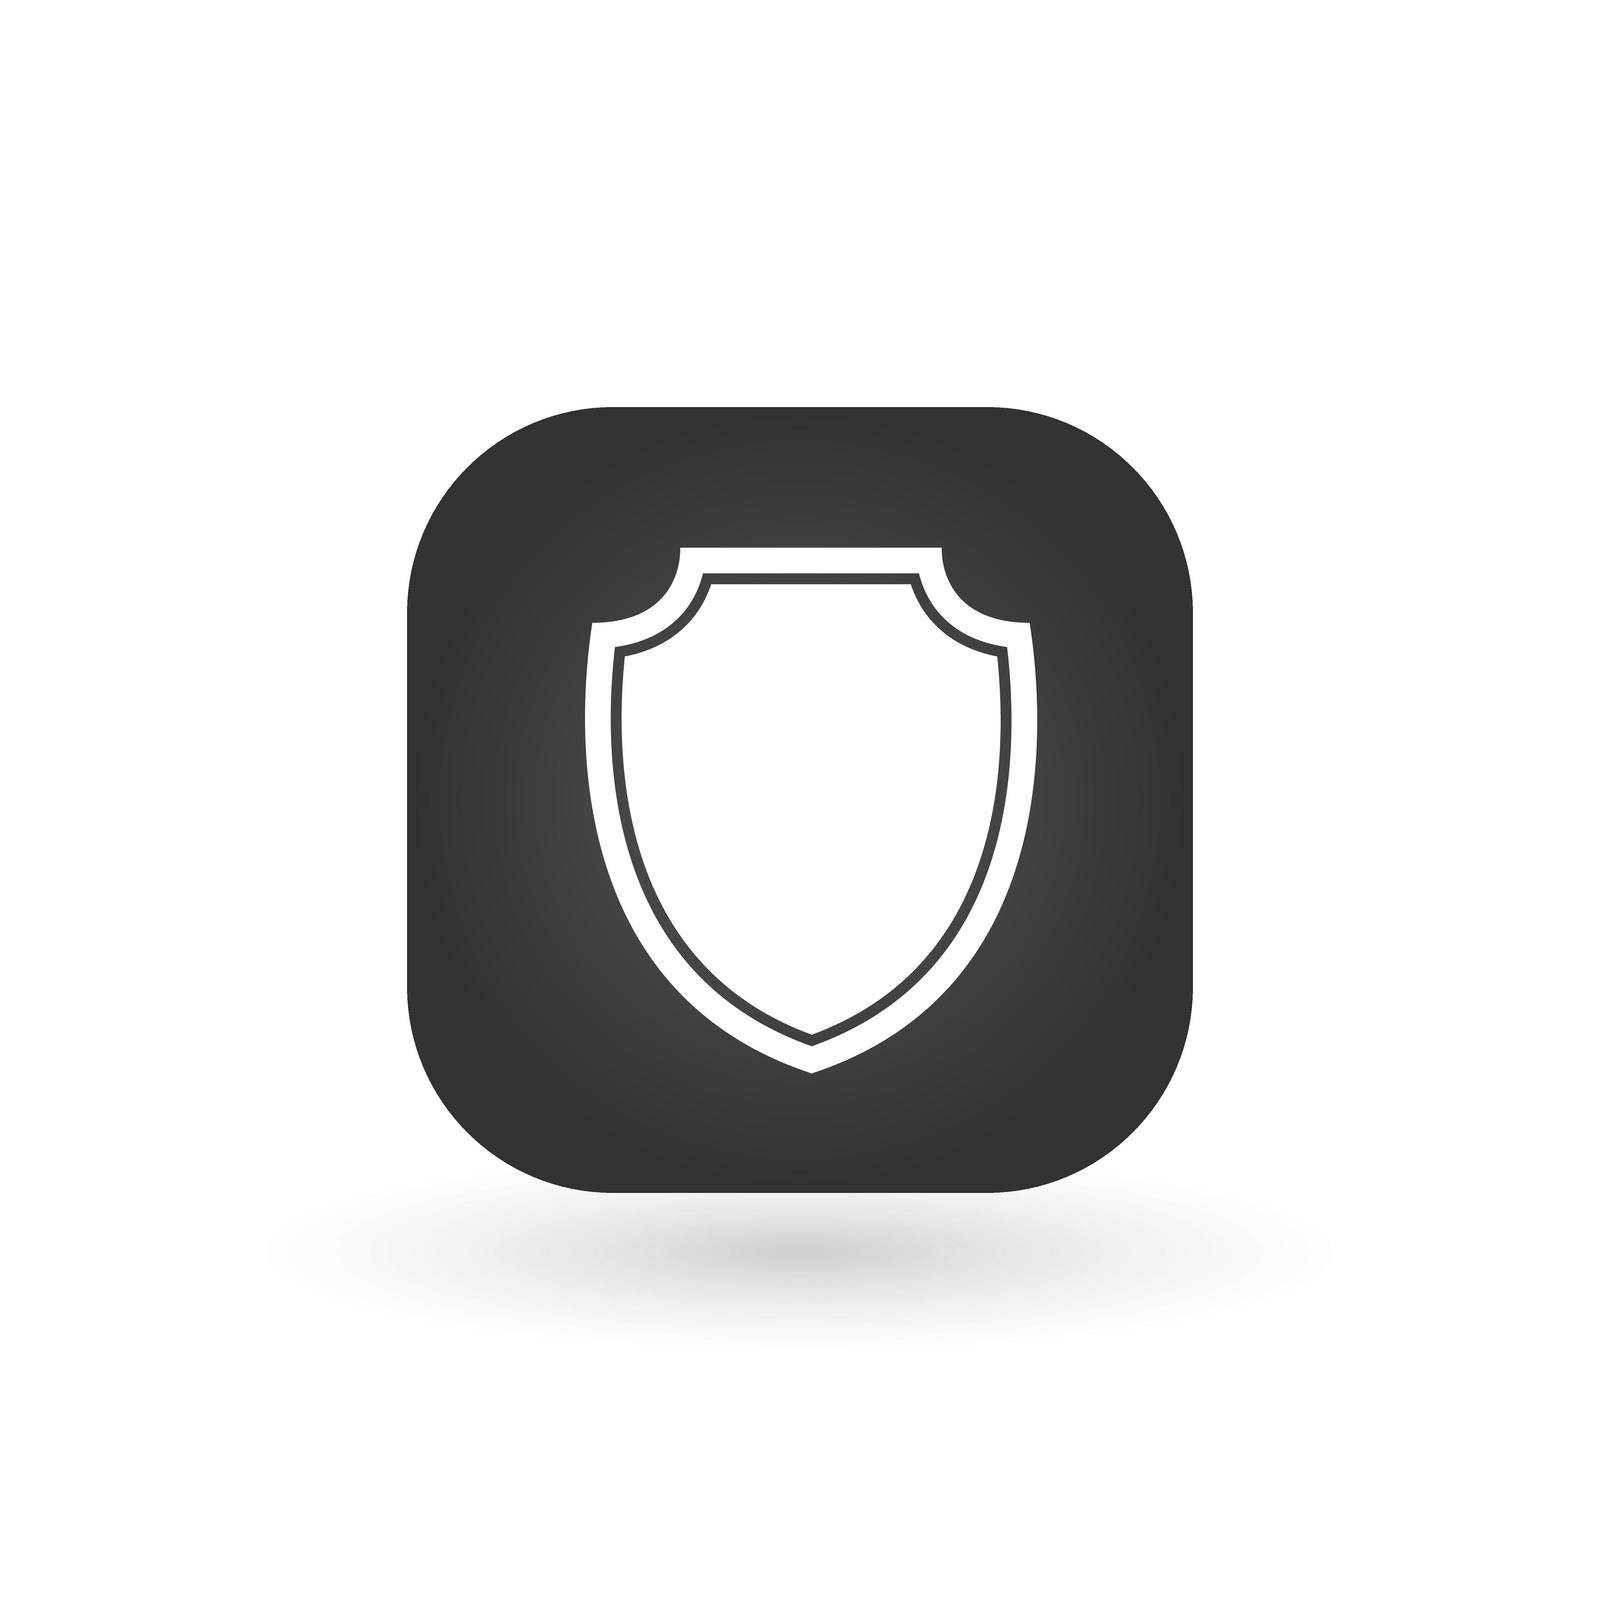 Guardian shield app icon, protection icon in flat style. Vector illustration isolated on white